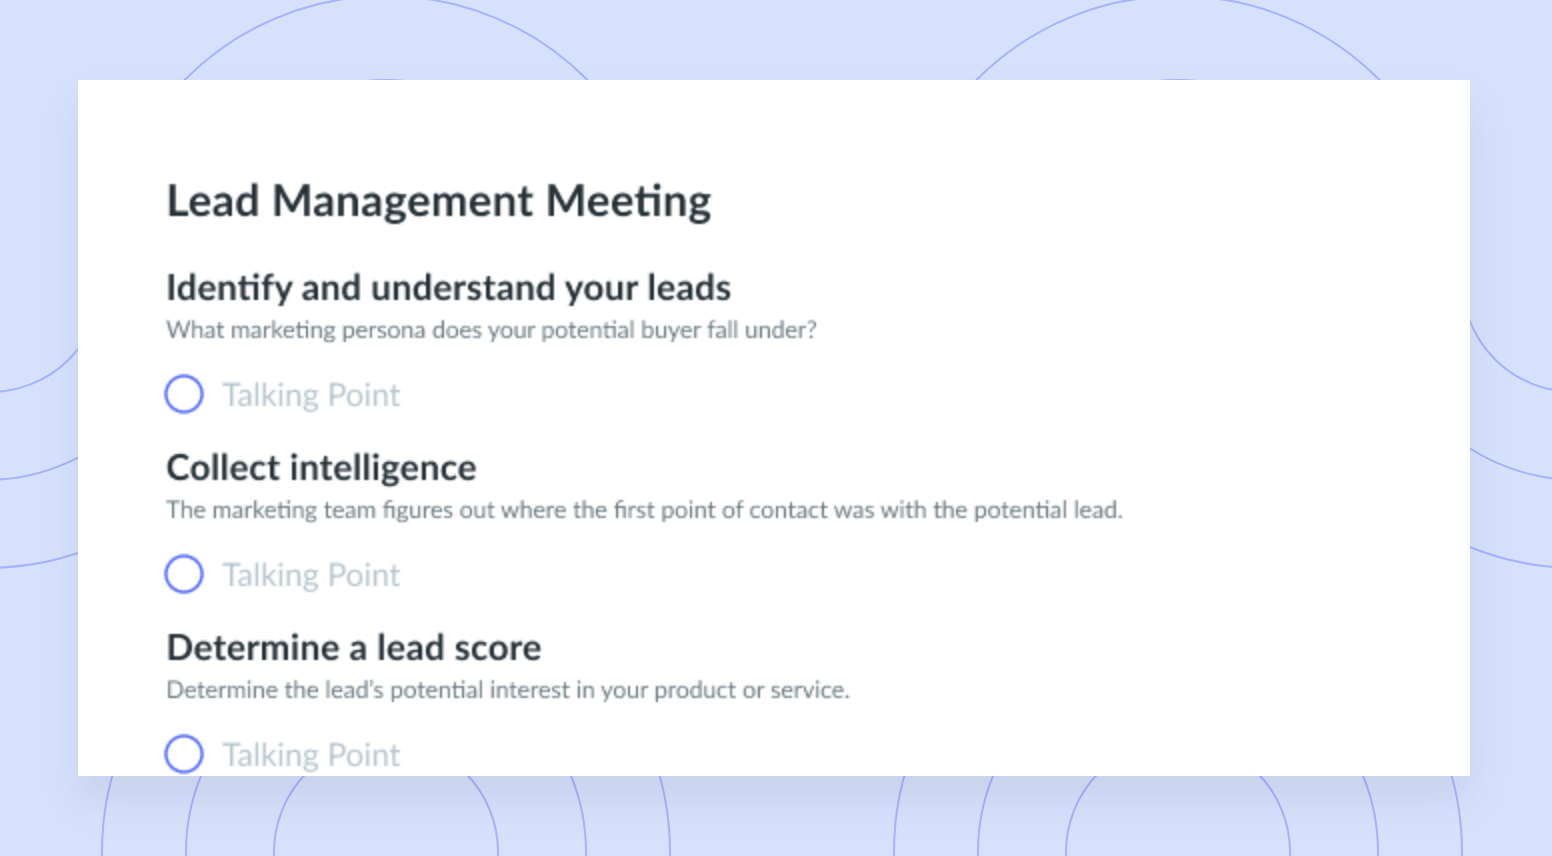 Lead Management Meeting Template